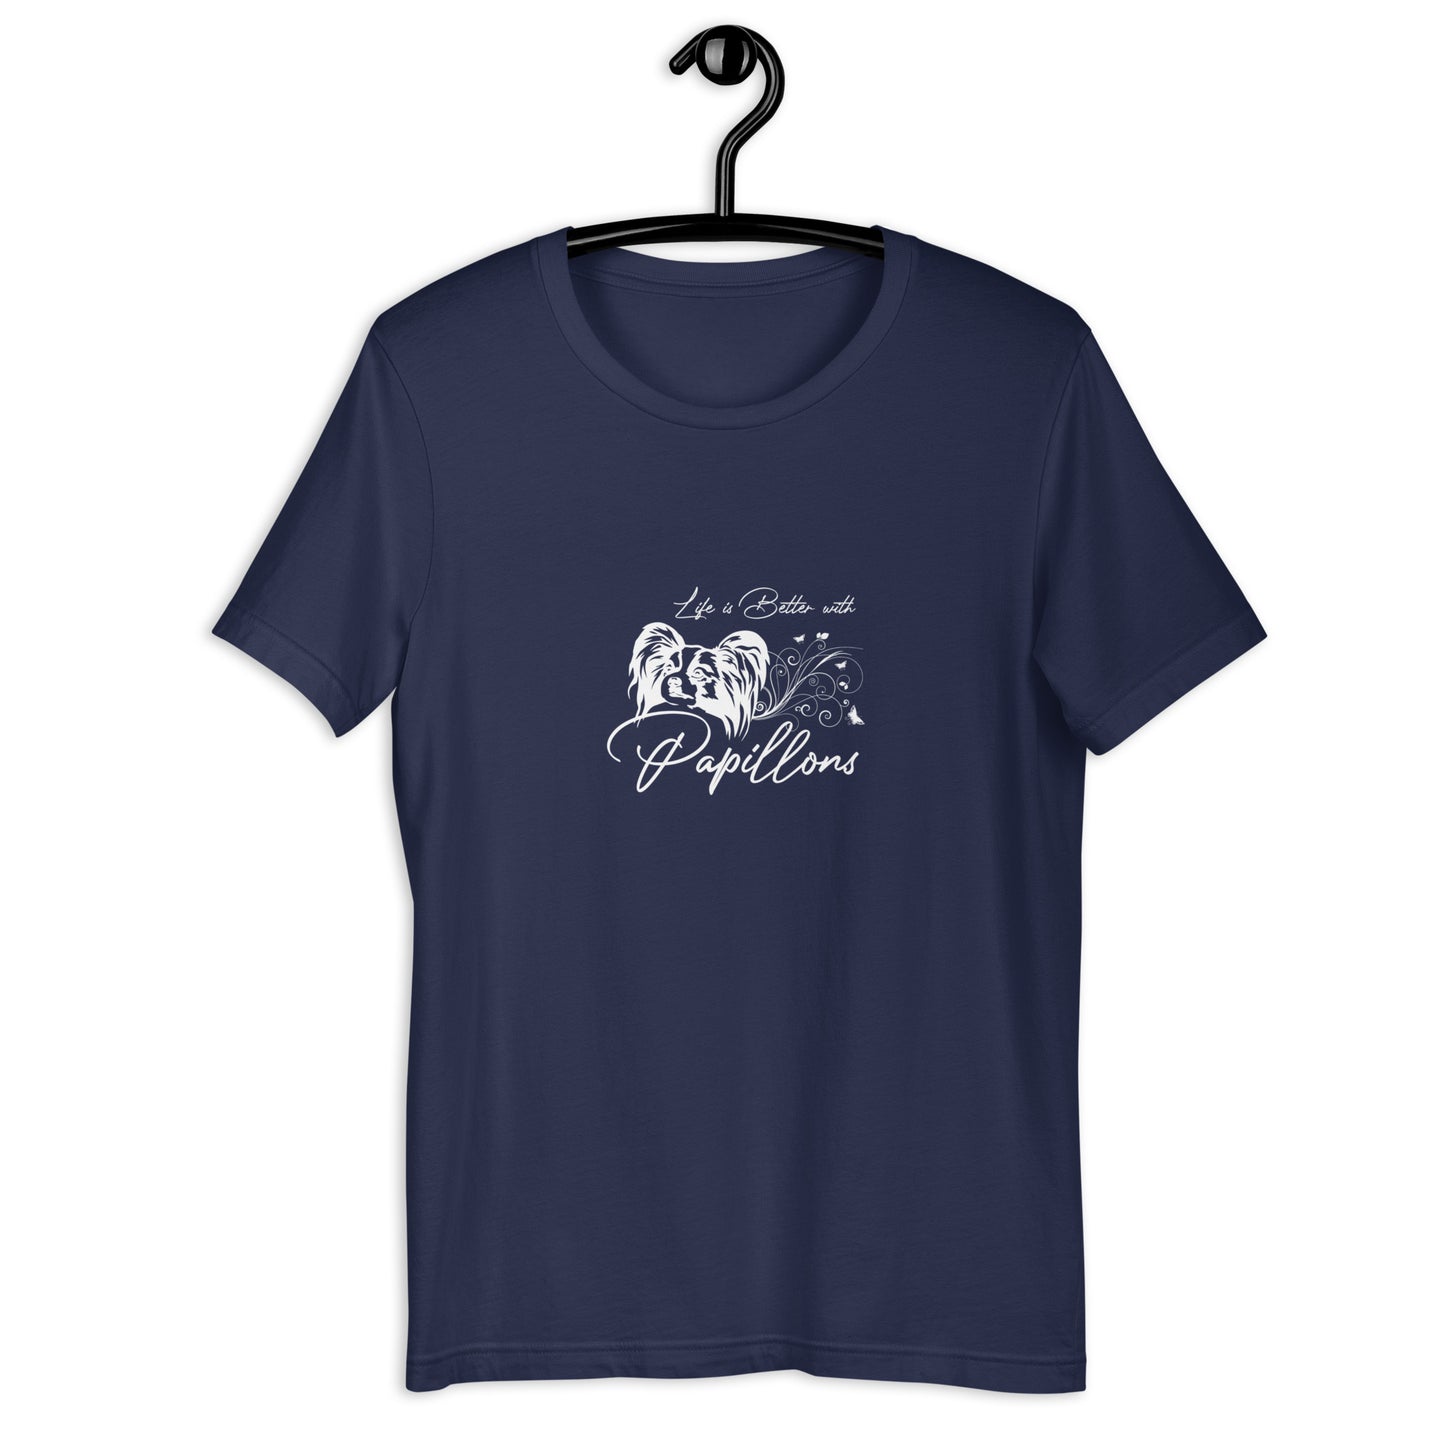 LIFE IS BETTER WITH PAPILLONS - Unisex t-shirt